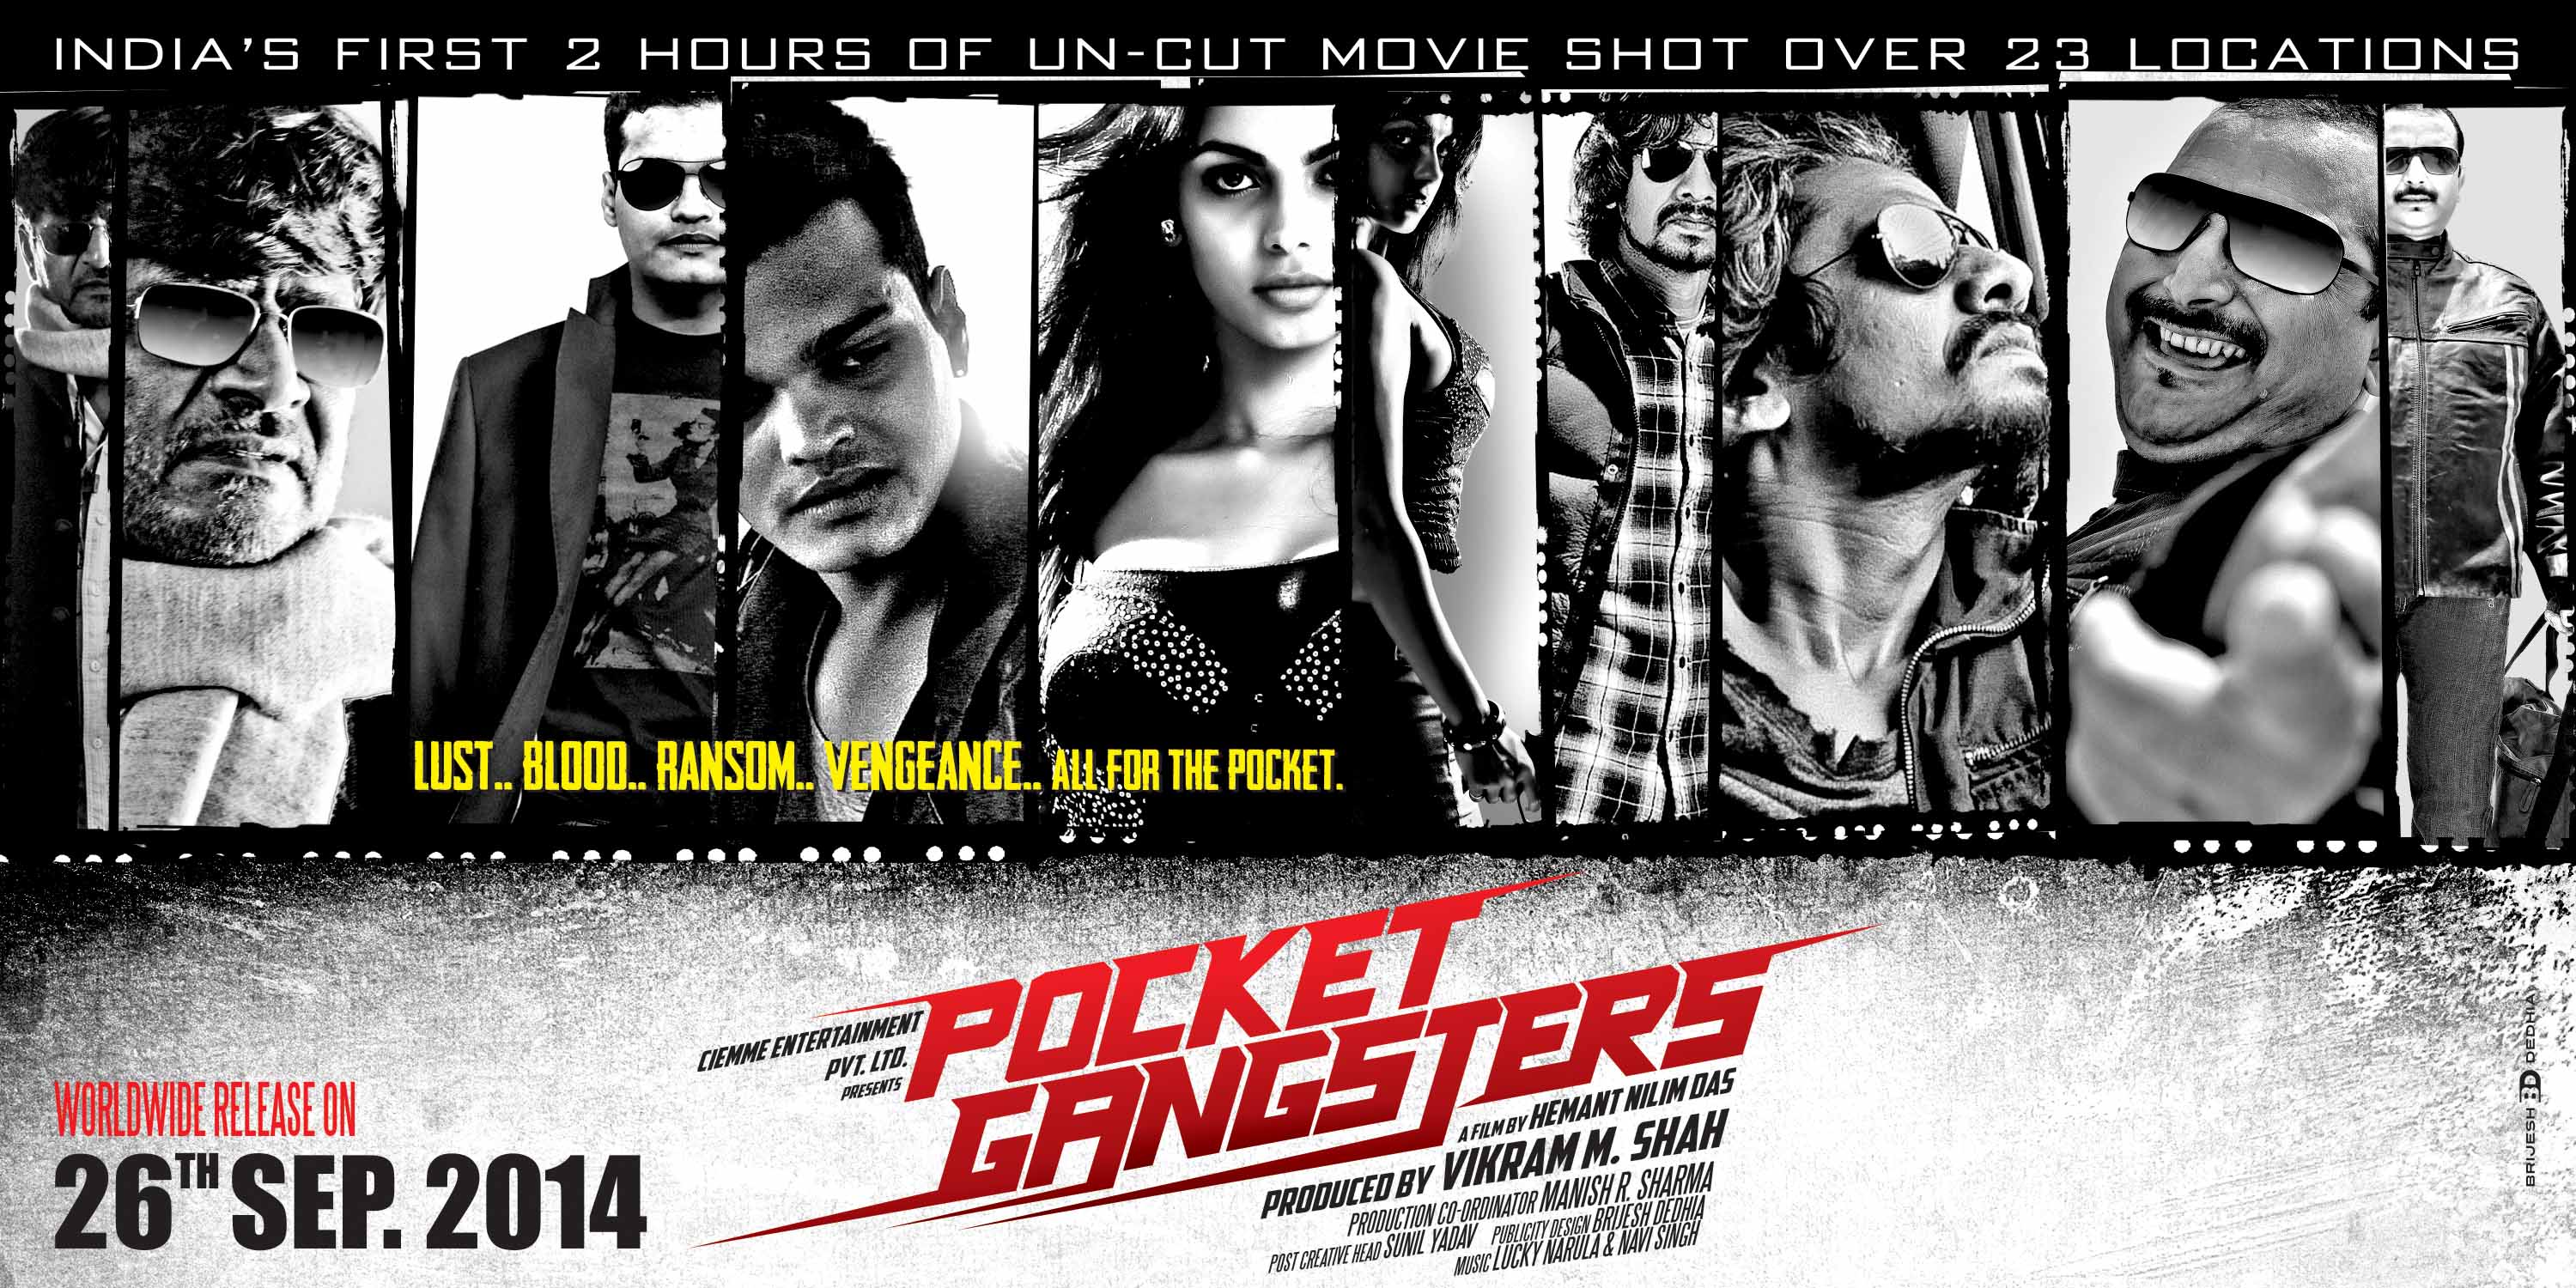 Pocket Gangsters is India's first one-take, uncut film: Hemant Nilim Das 